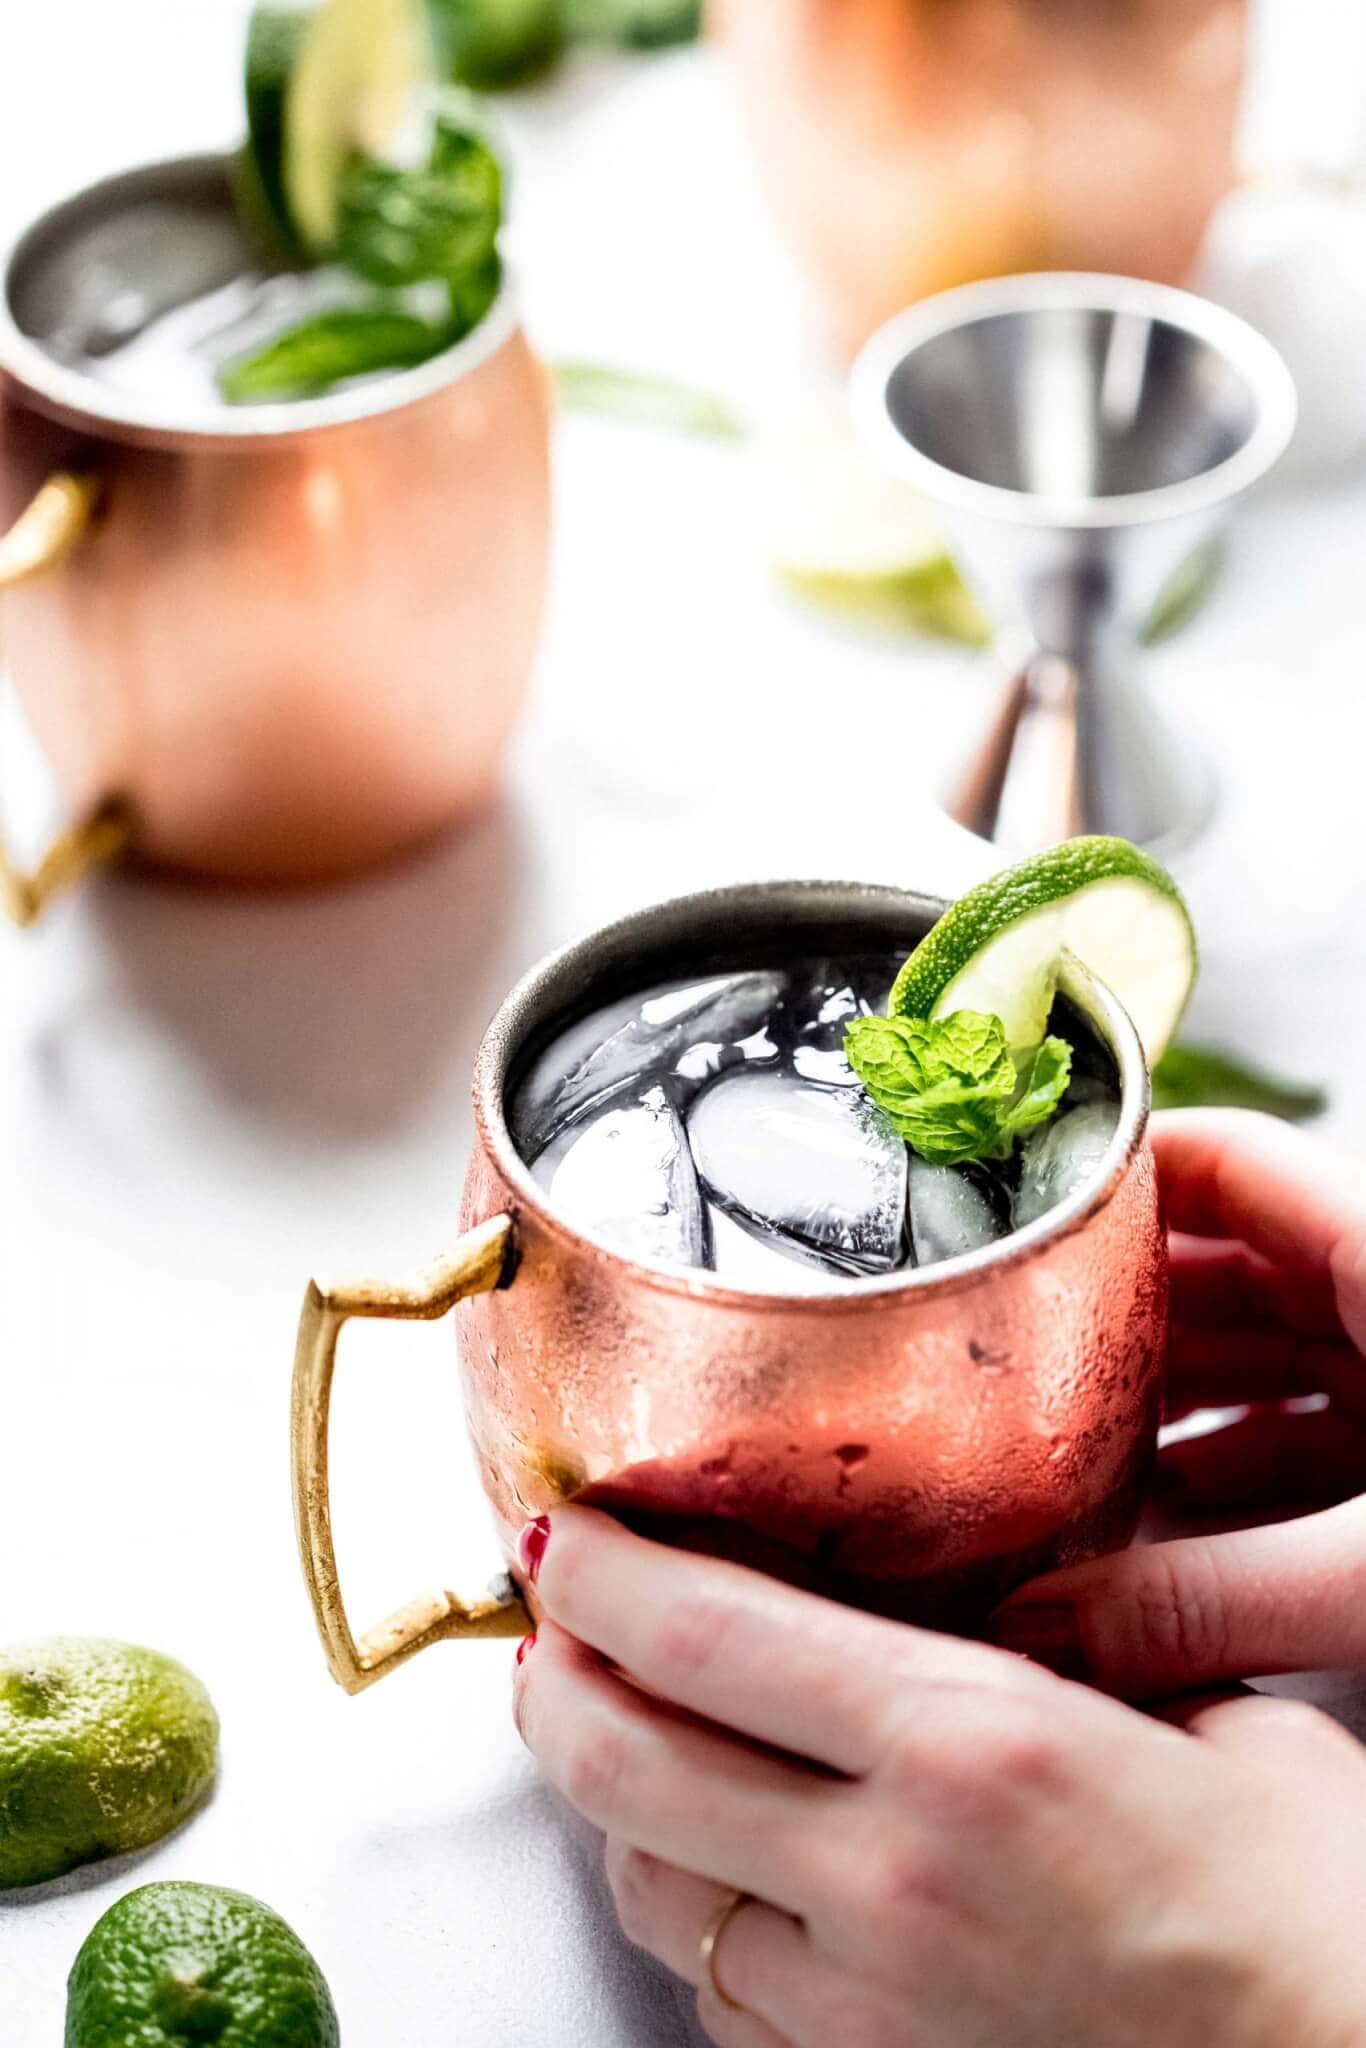 Hands holding moscow mule in copper mug with mug in background